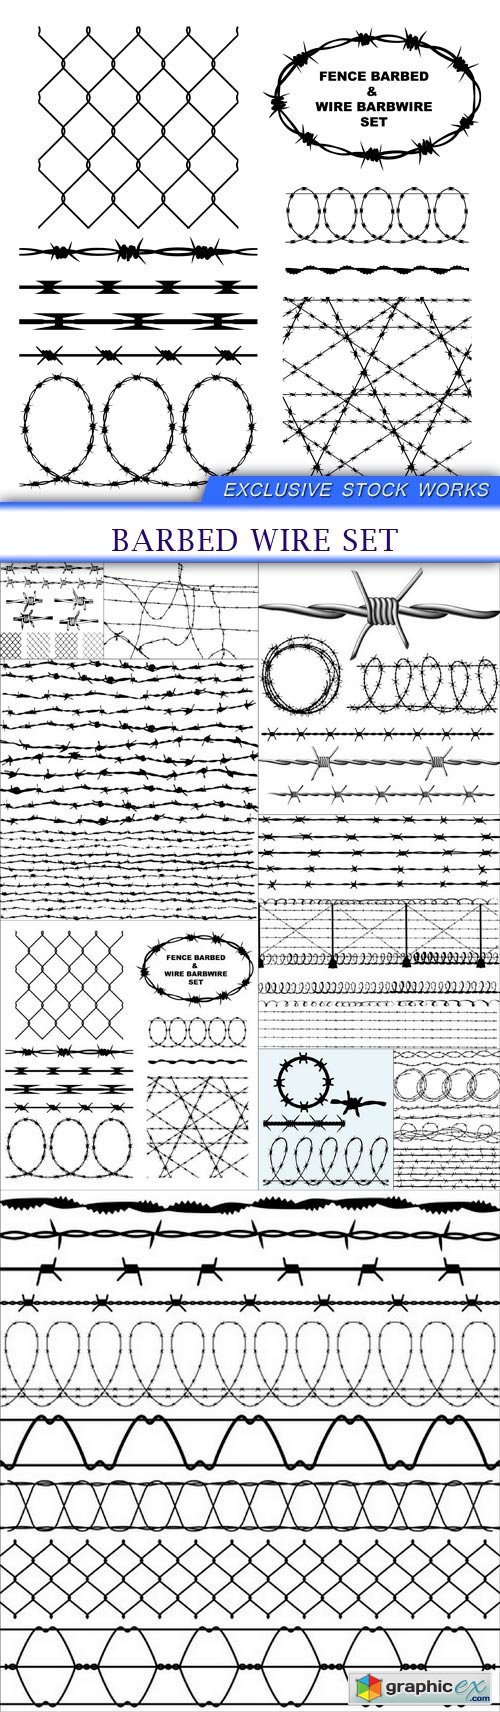 Barbed wire set 9X EPS